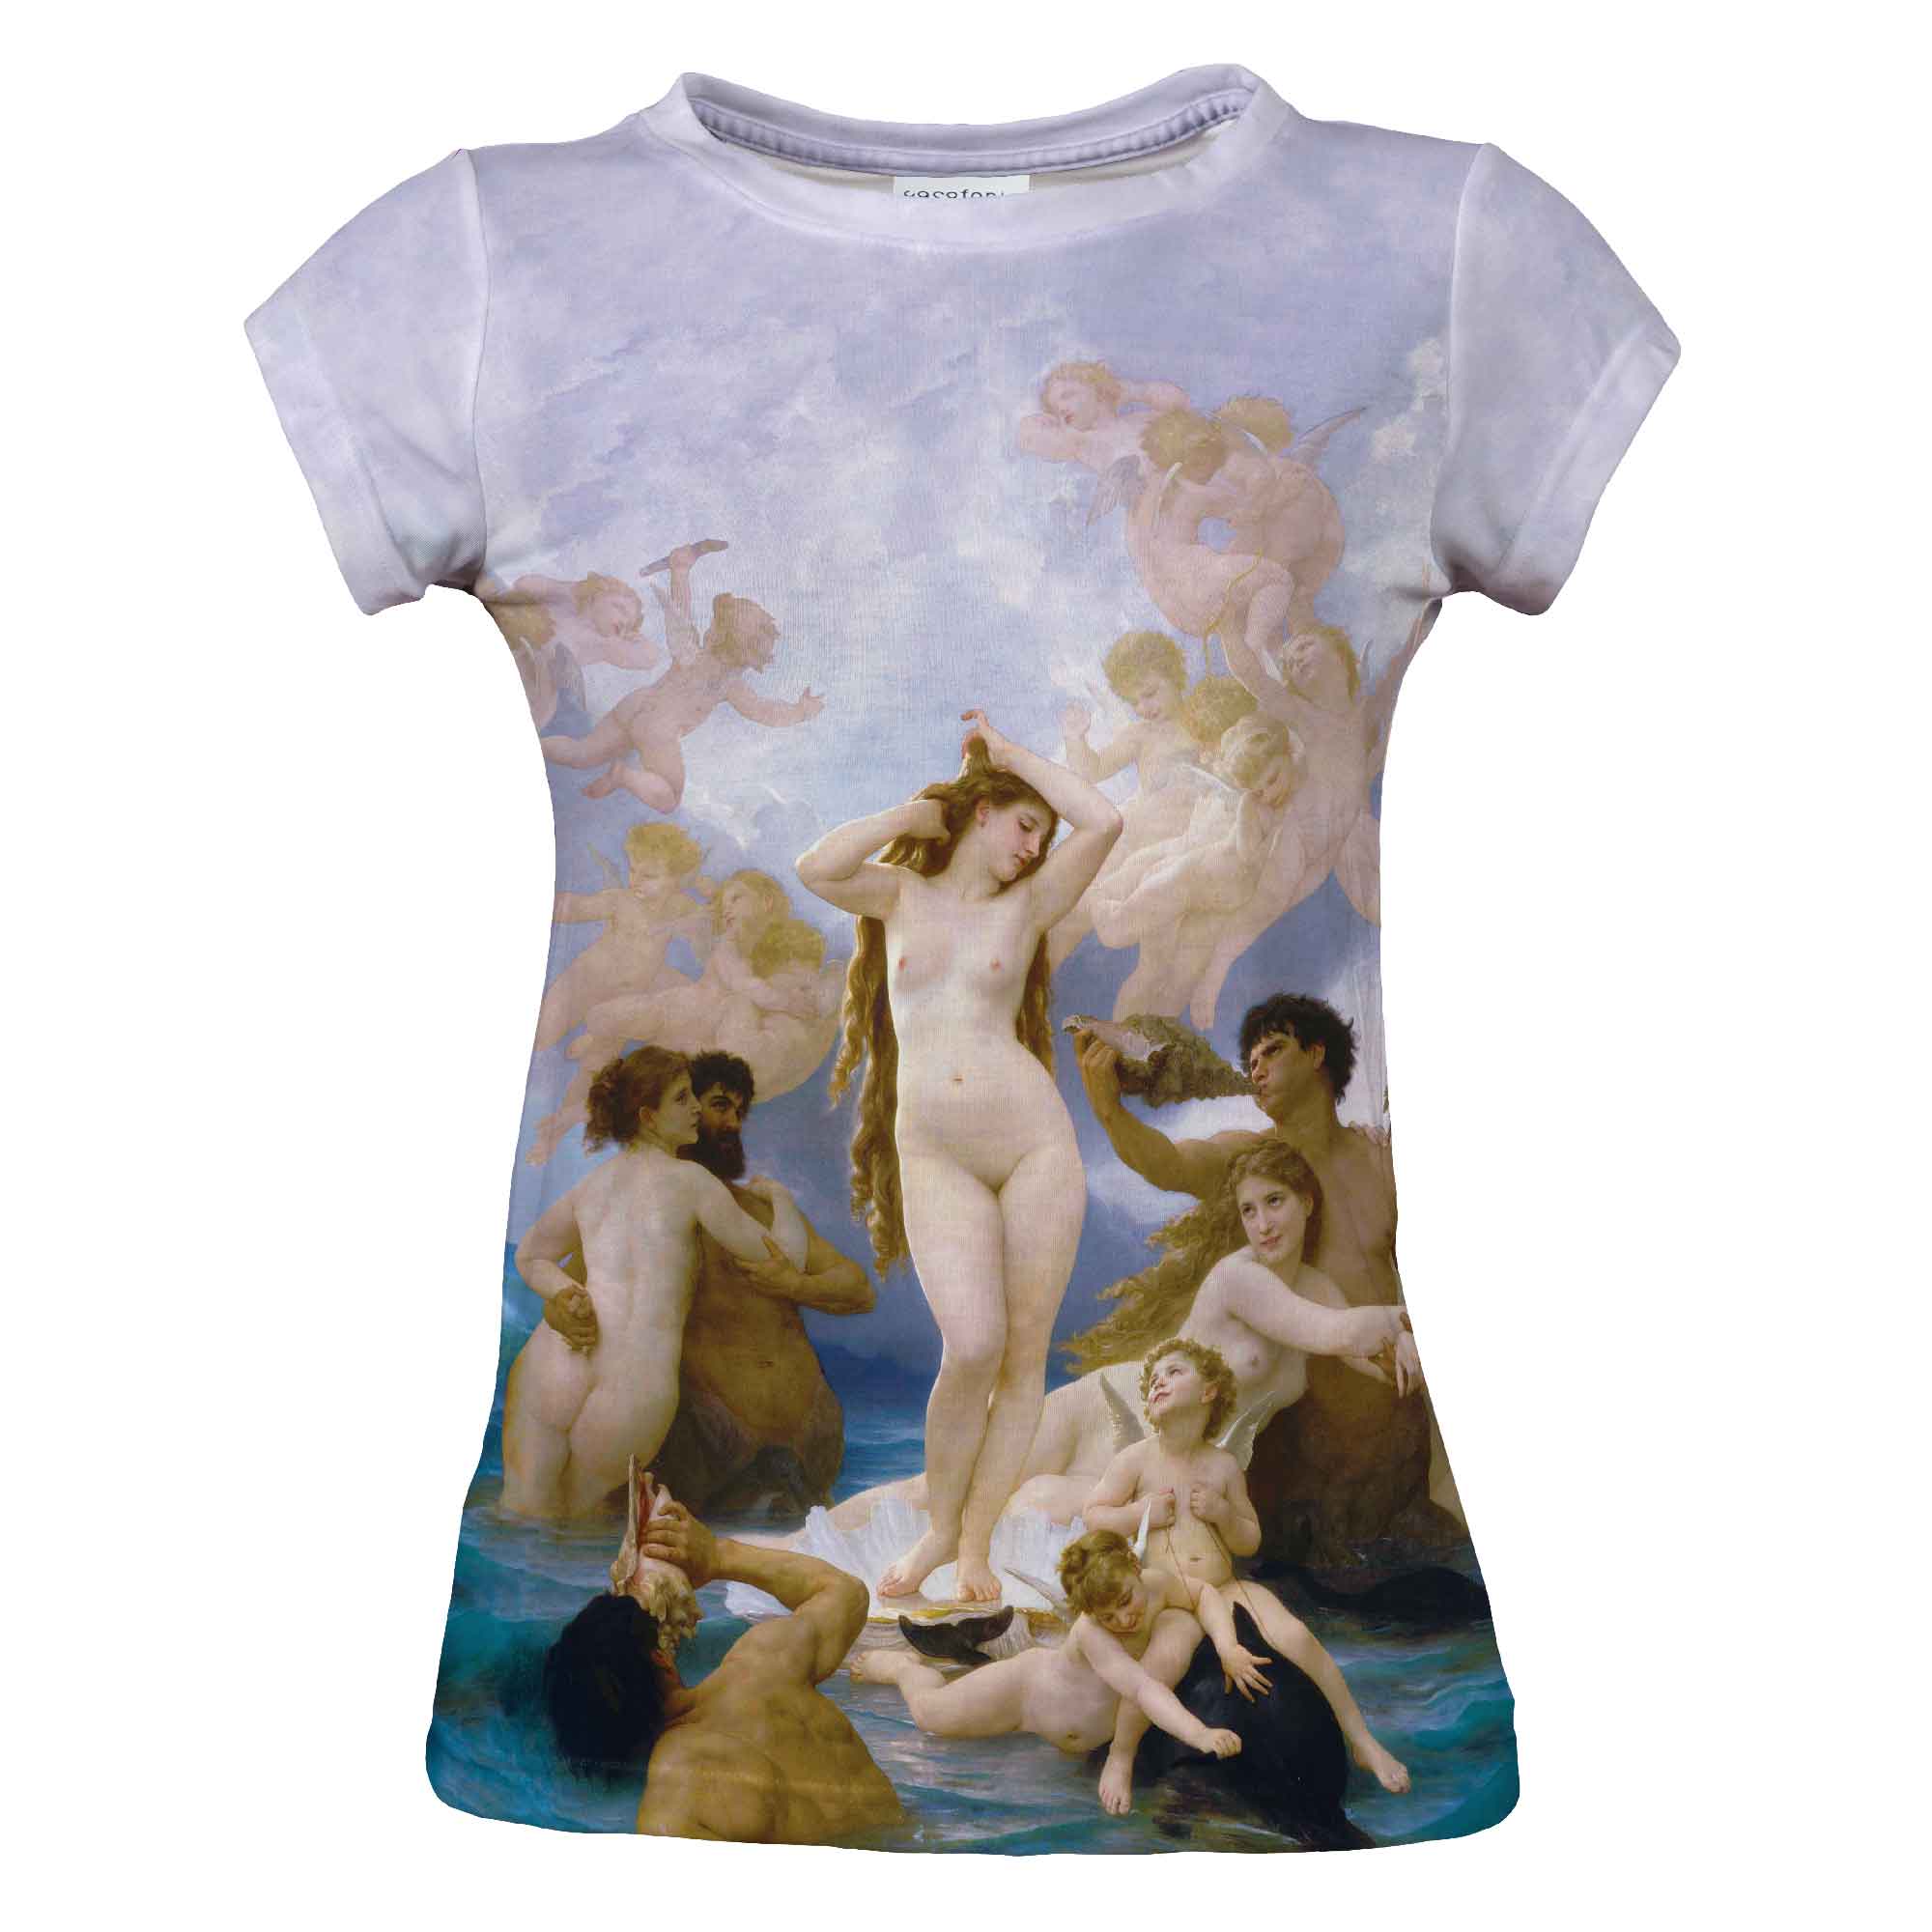 Cacofonia women's lilac shirt. William-Adolphe Bouguereau Birth of Venus, Cacofonia sewn in Poland. clothes with art (7)